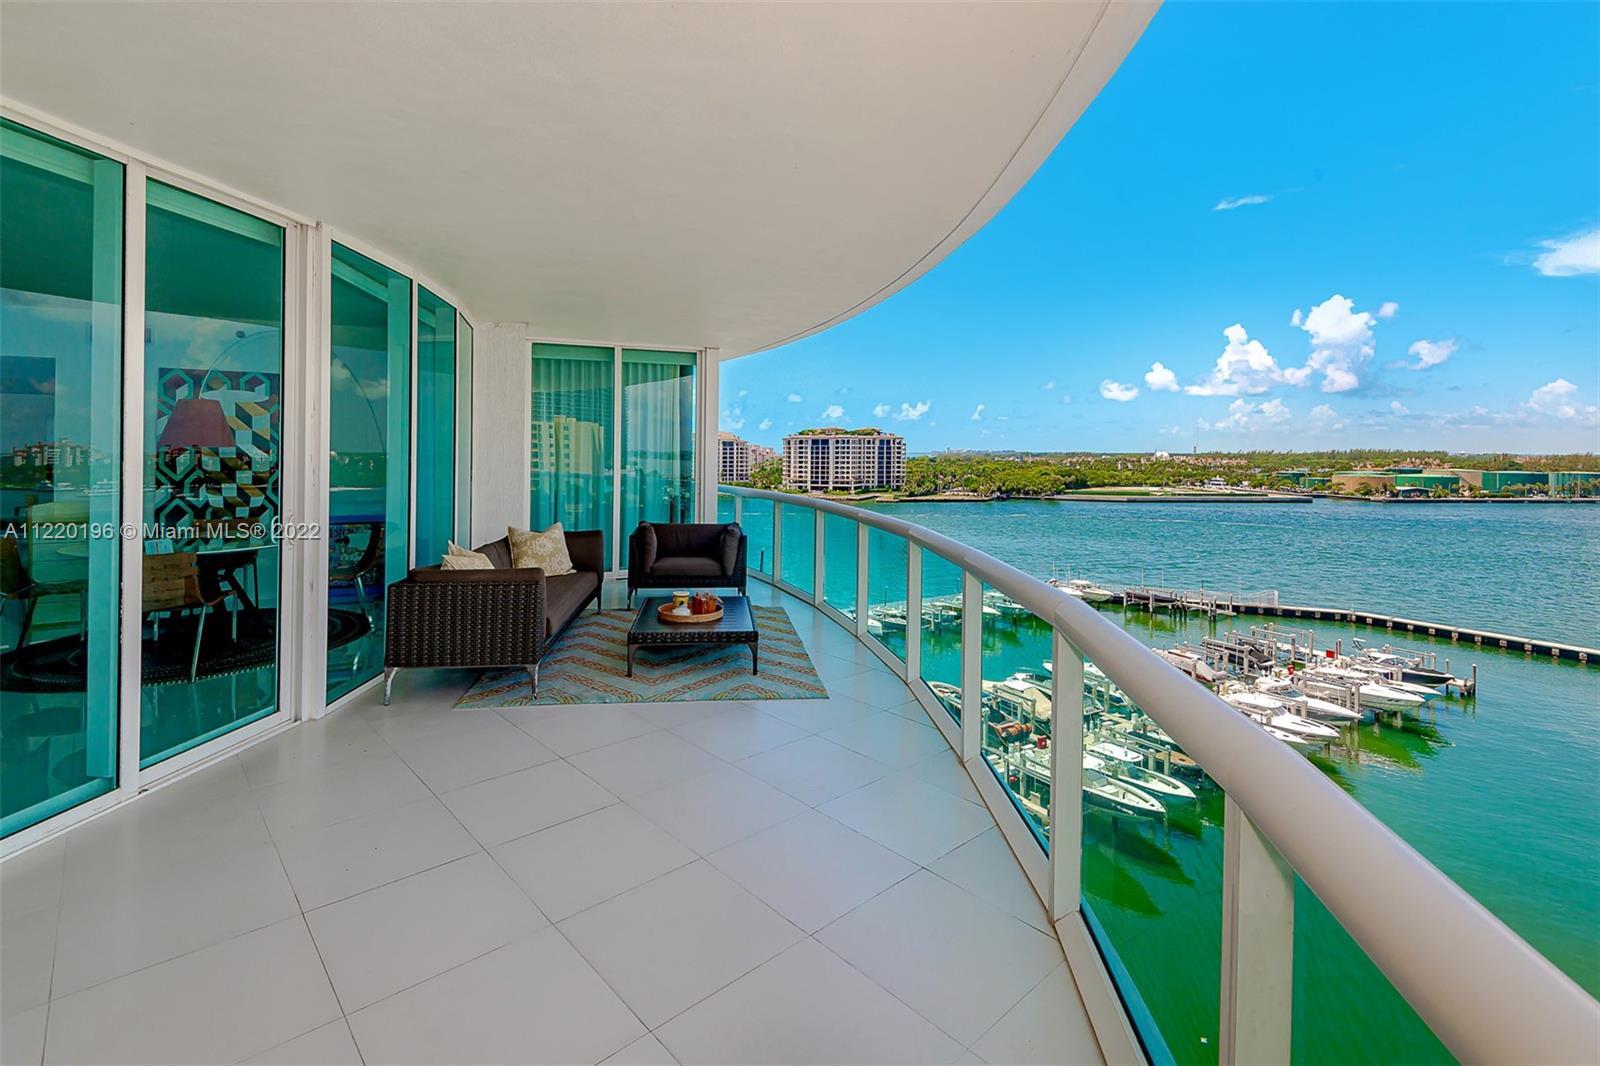 Stunning most sought after corner residence with infinite views of the ocean, bay, cityscapes and Fi